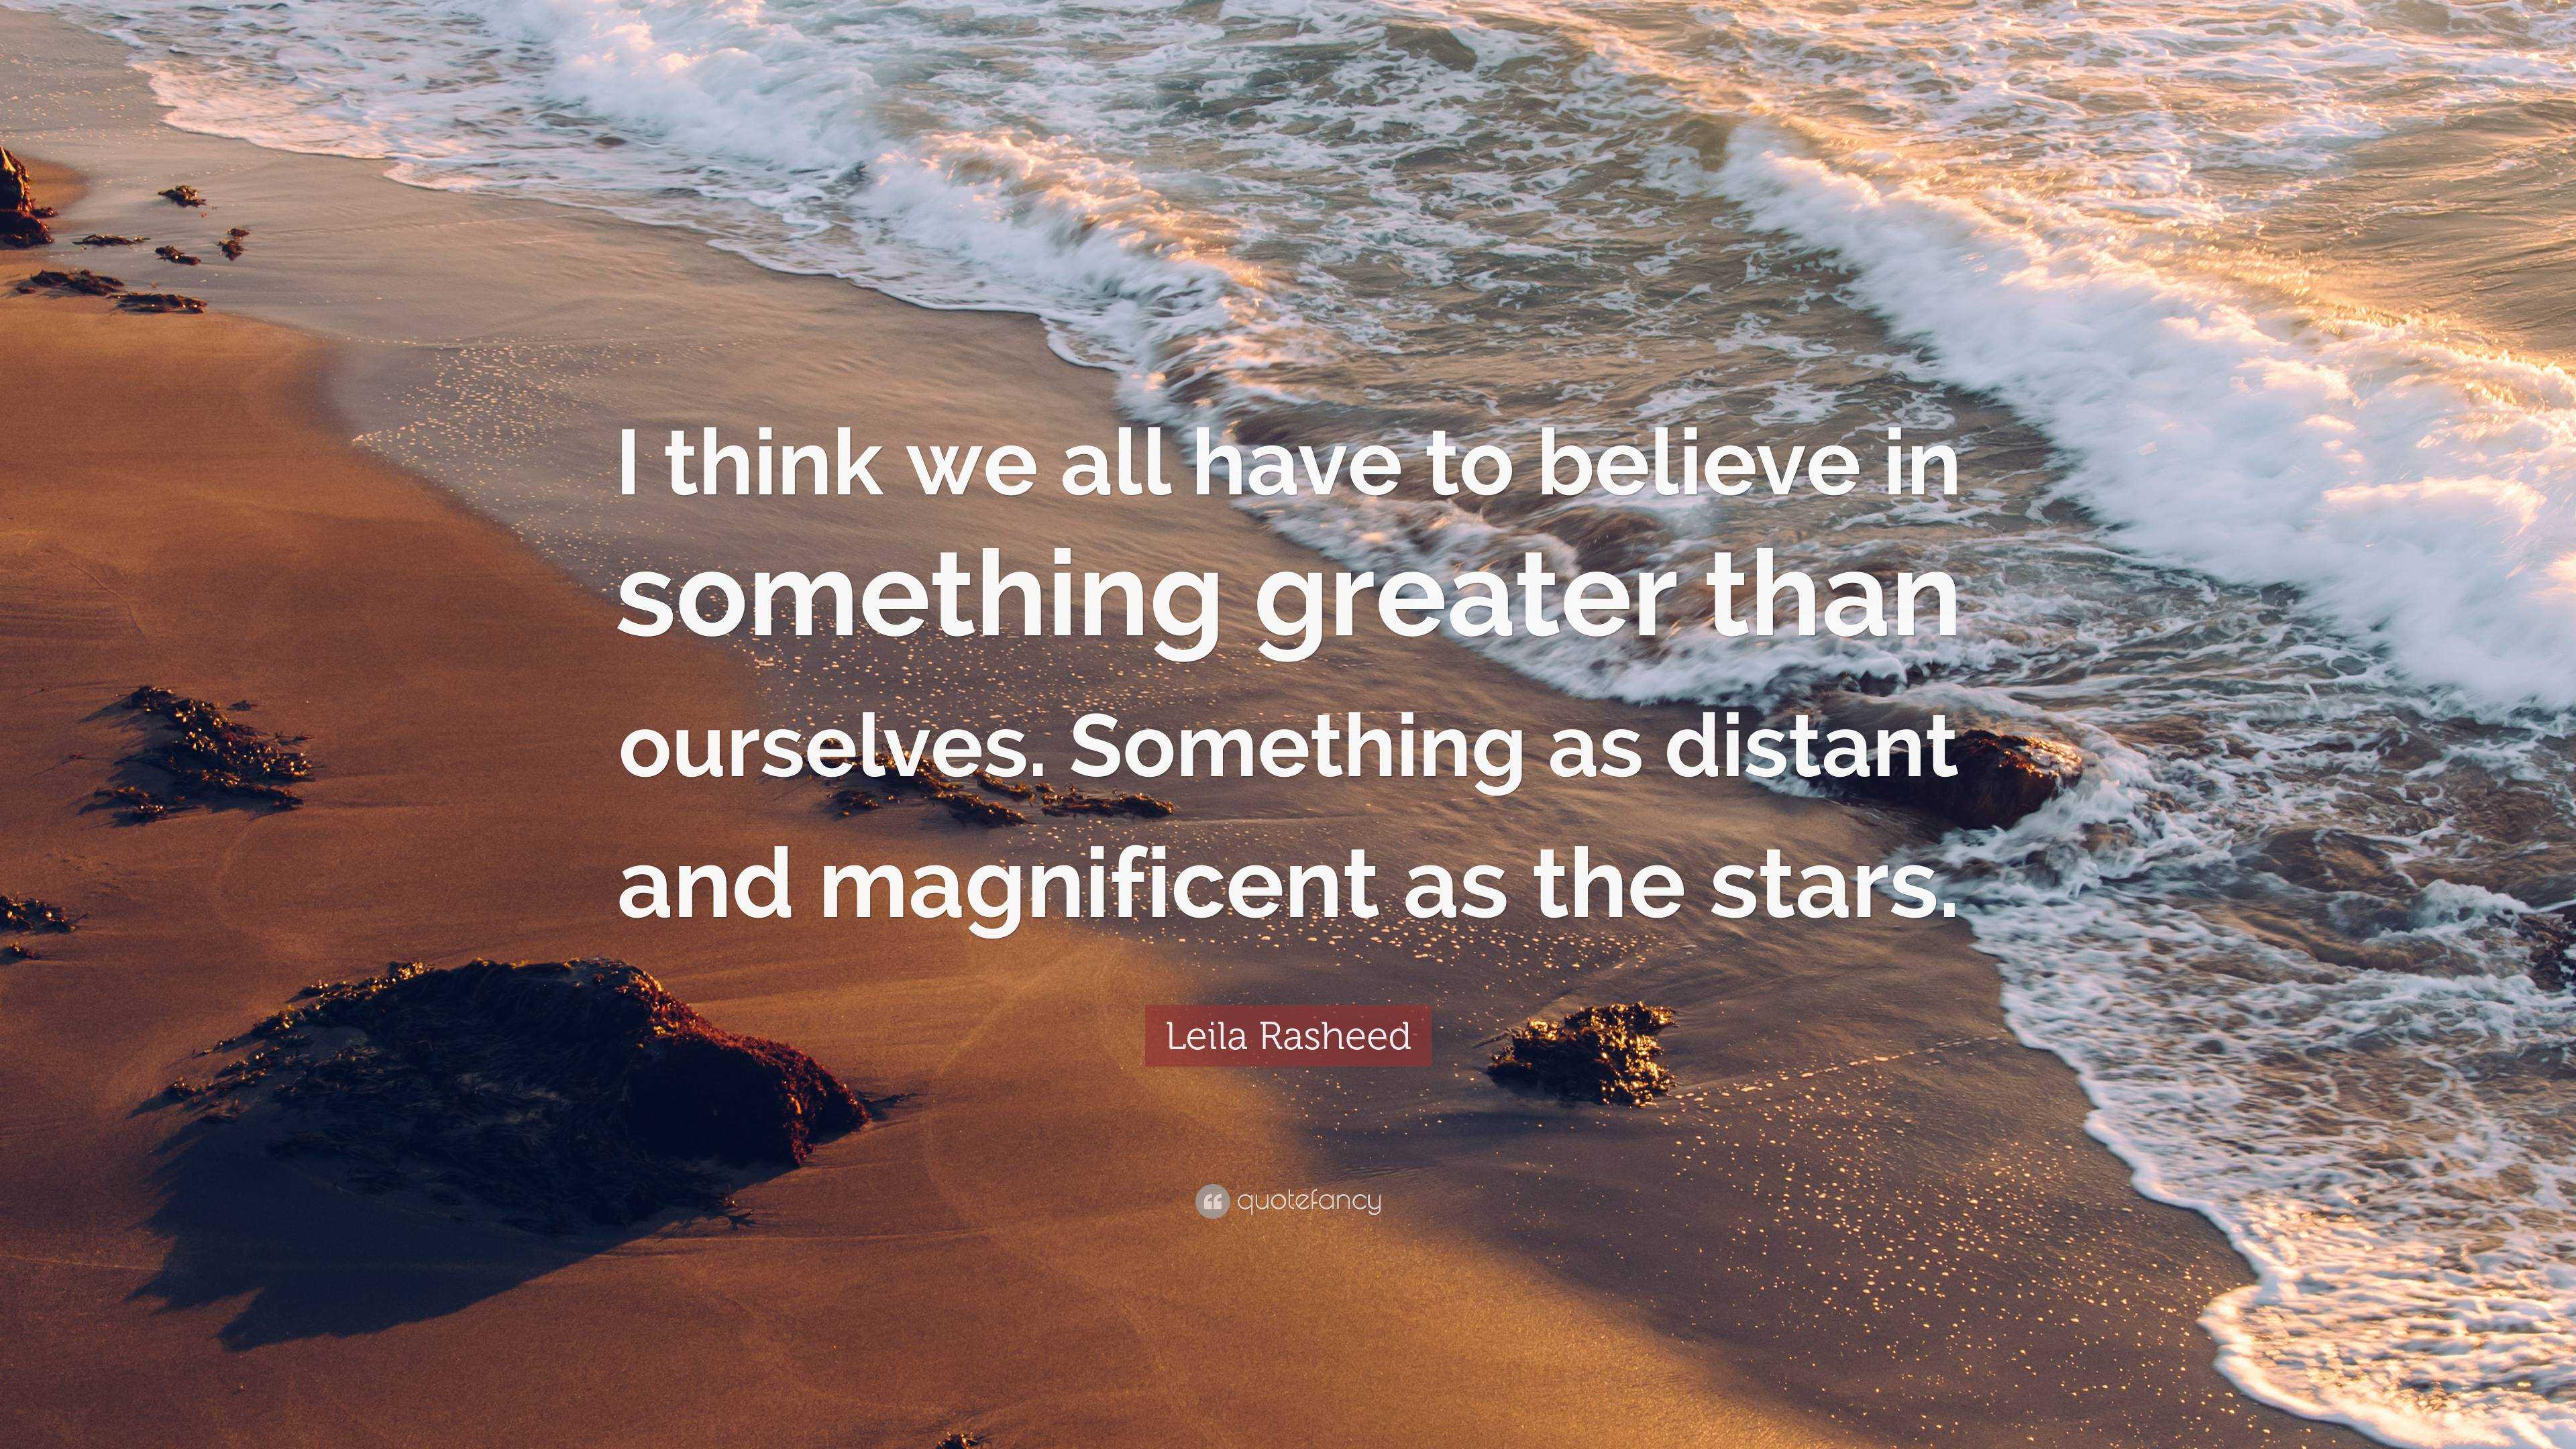 Leila Rasheed Quote: “I think we all have to believe in something ...